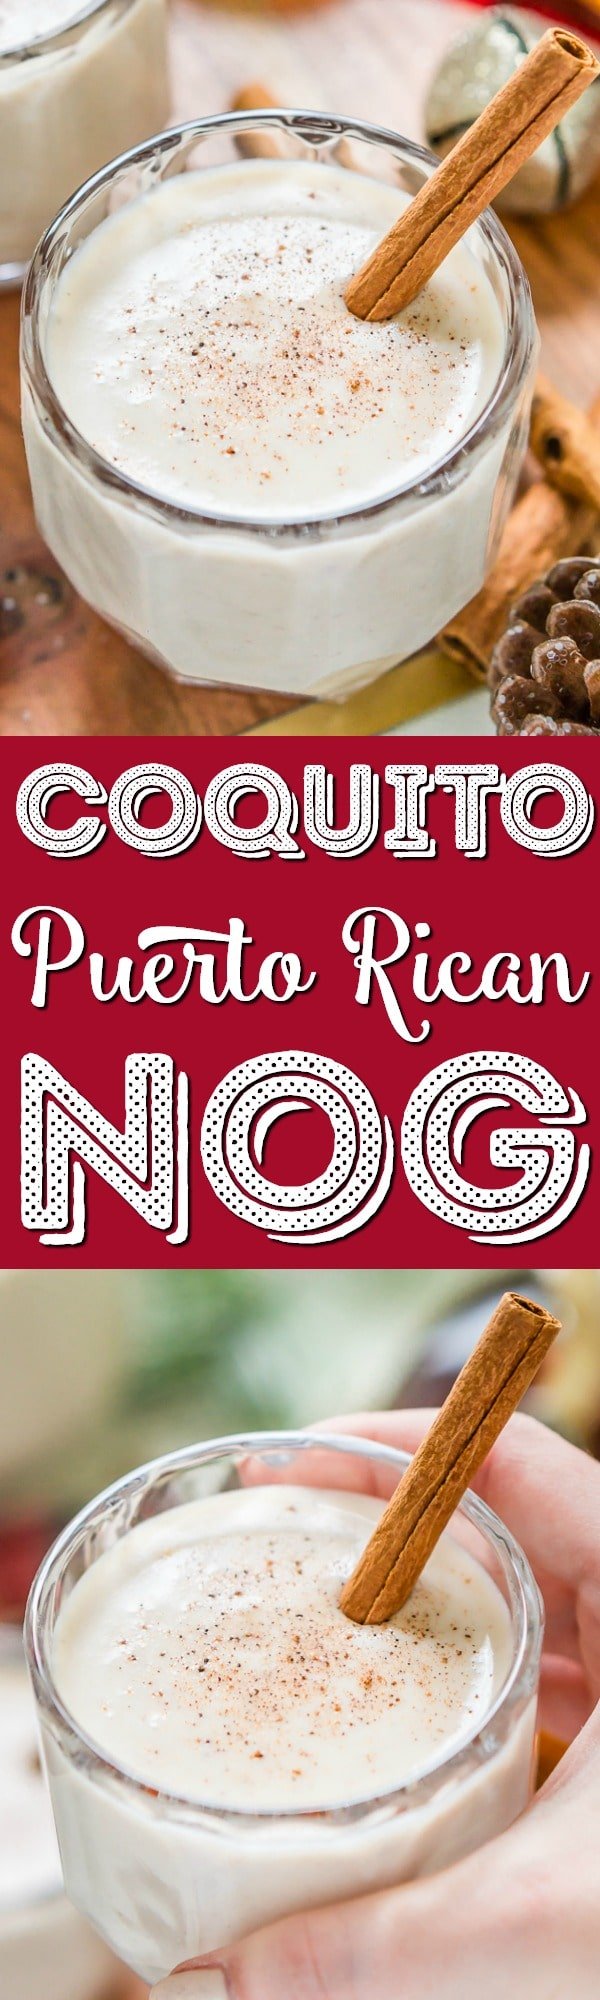 This Coquito recipe is a creamy and rich coconut-based Puerto Rican cocktail similar to an eggnog and a deliciously thick holiday drink loaded with spices and rum! via @sugarandsoulco